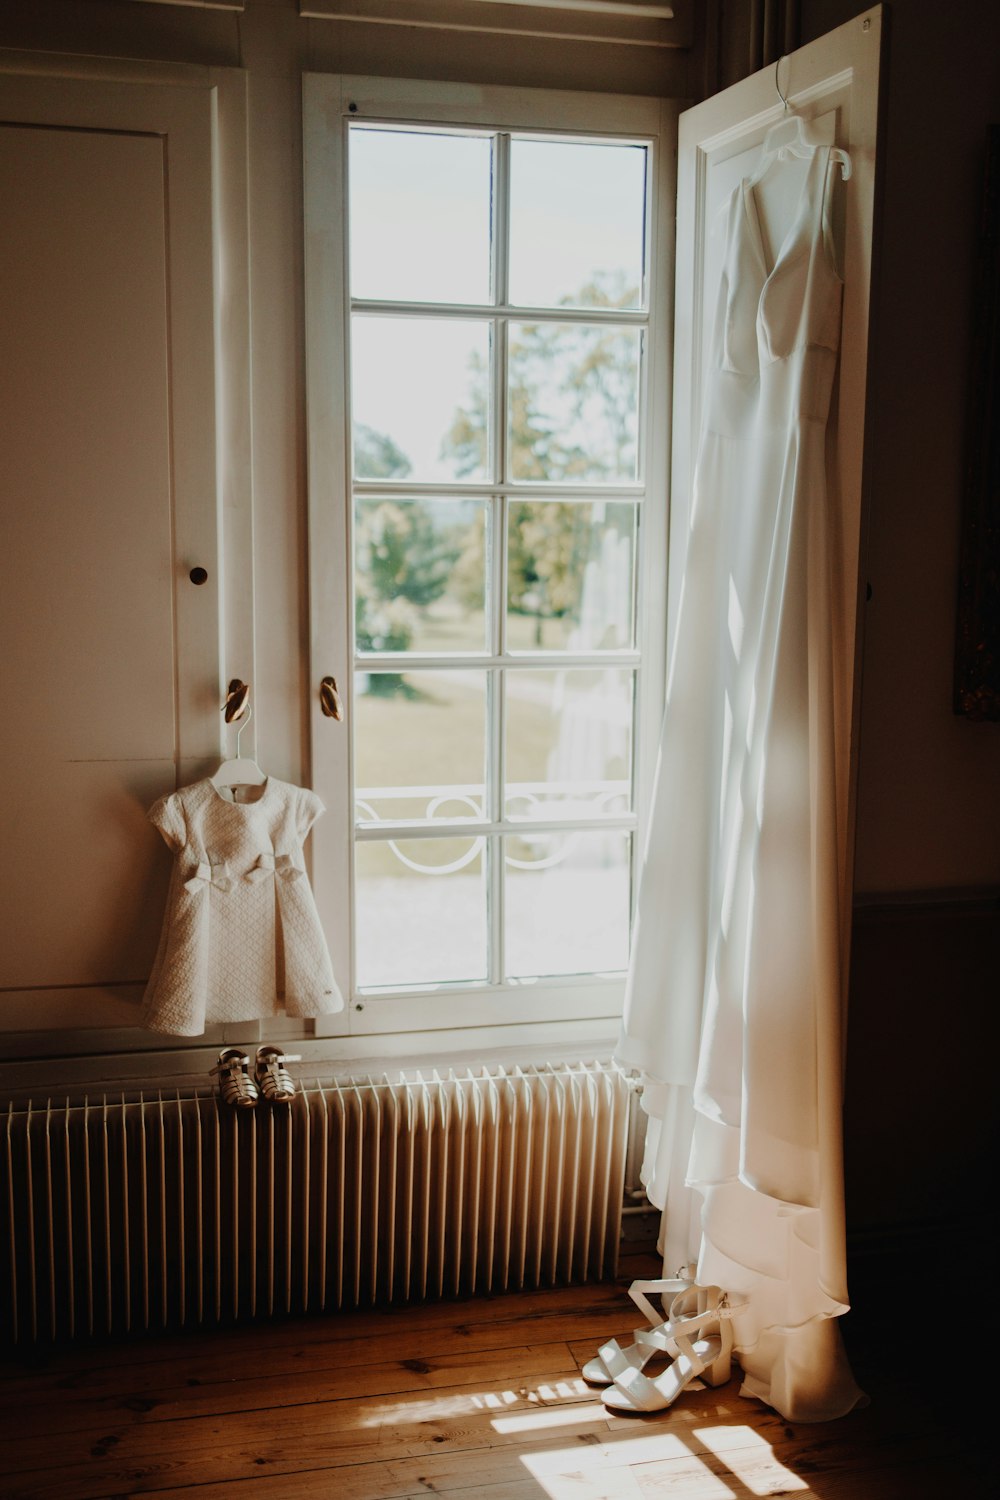 a white dress hanging on a window sill next to a radiator